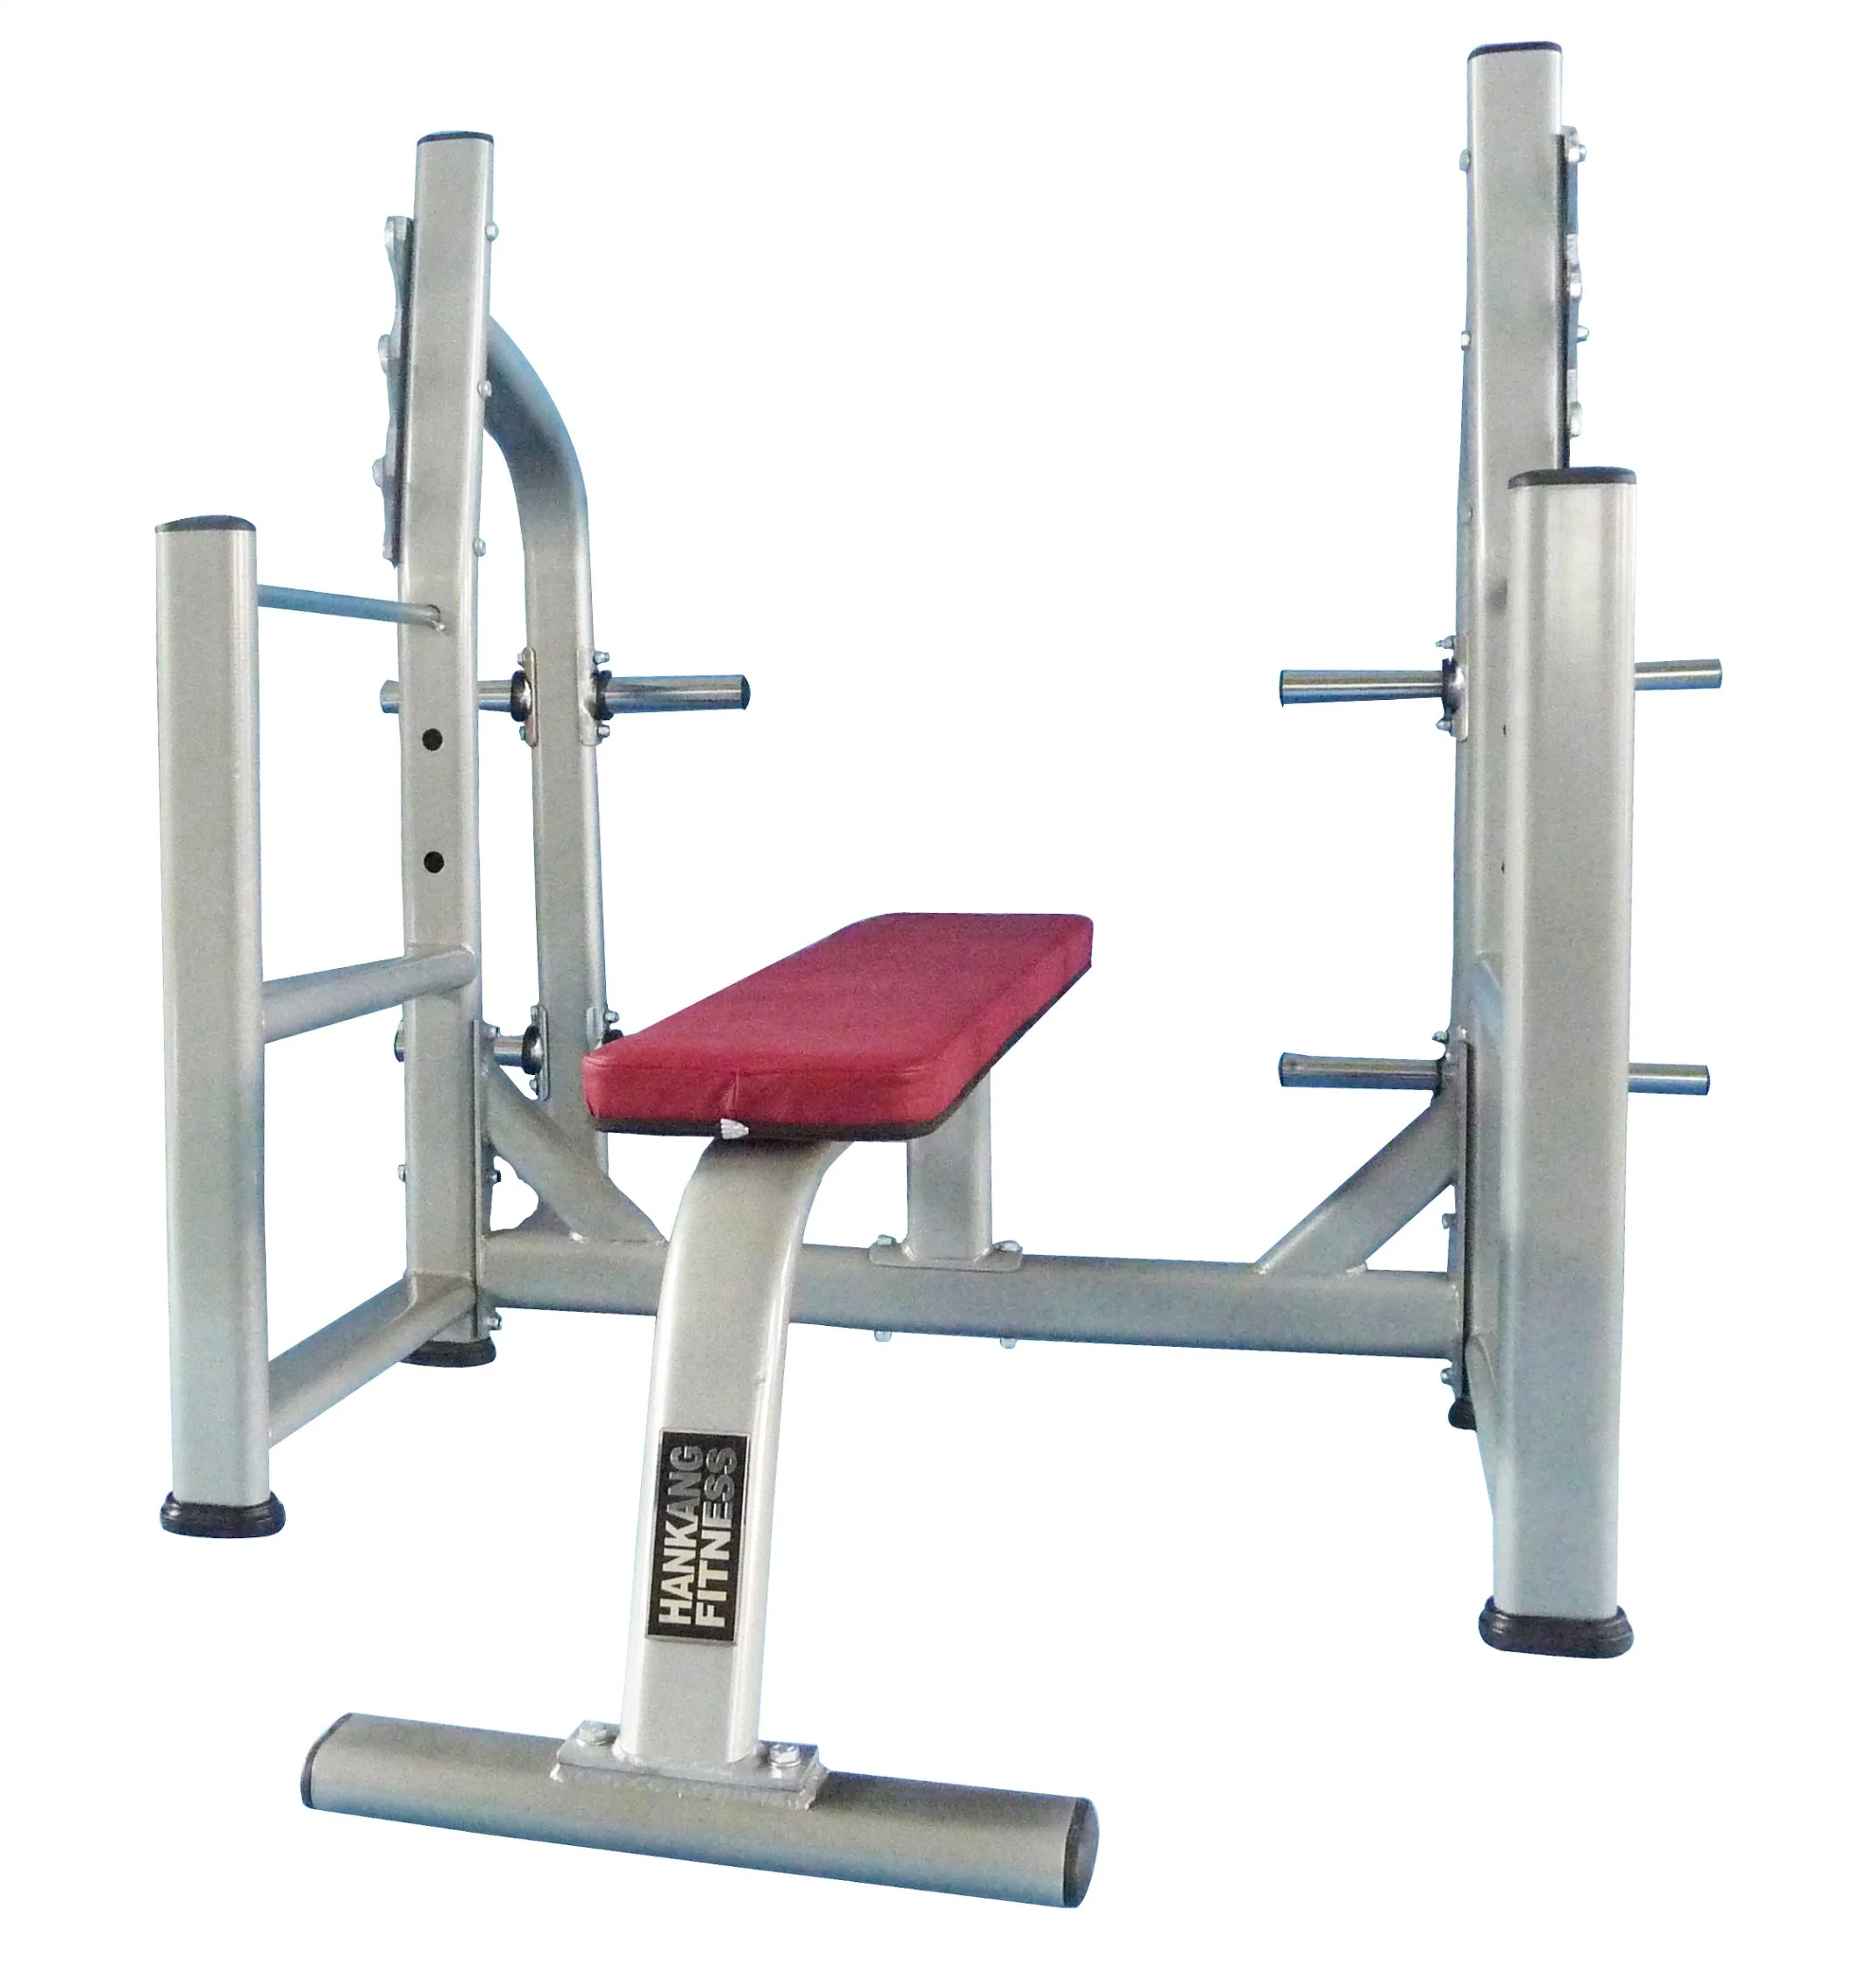 The new Latest gym equipment and fitness,strength machine and fitness equipment,gym equipment, China New Best Professinoal Flat Bench Press (HK-1038)